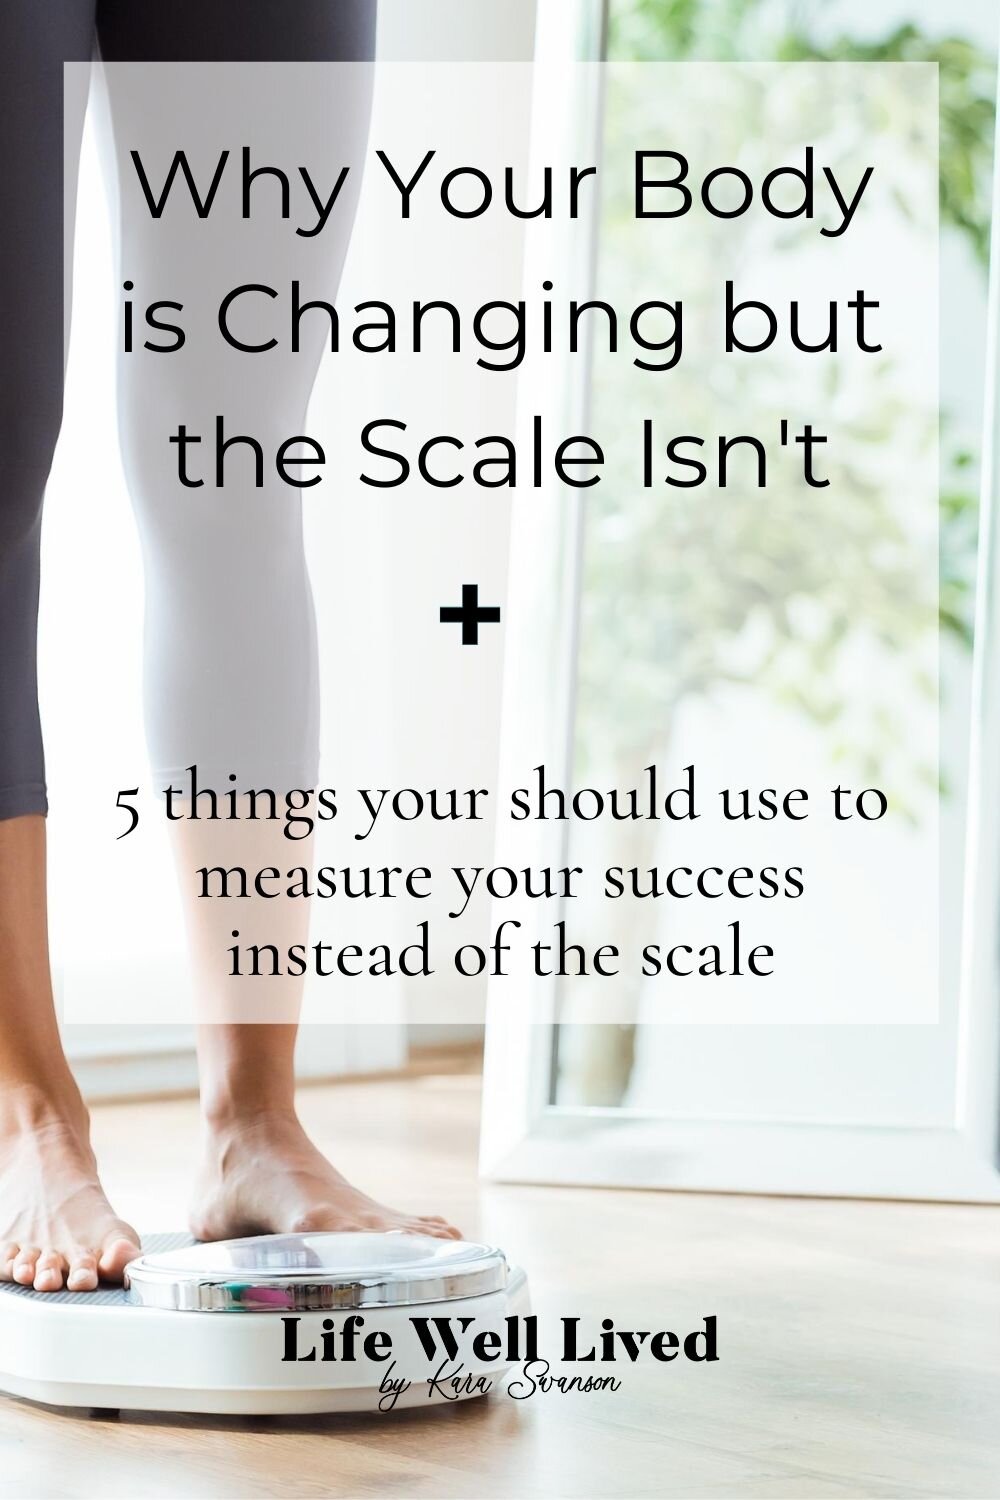 Has anyone bought the scale that Noom recommends? I have had a regular scale  for many years, but I'm interested to see my body composition changes when  my weight goes down. Is